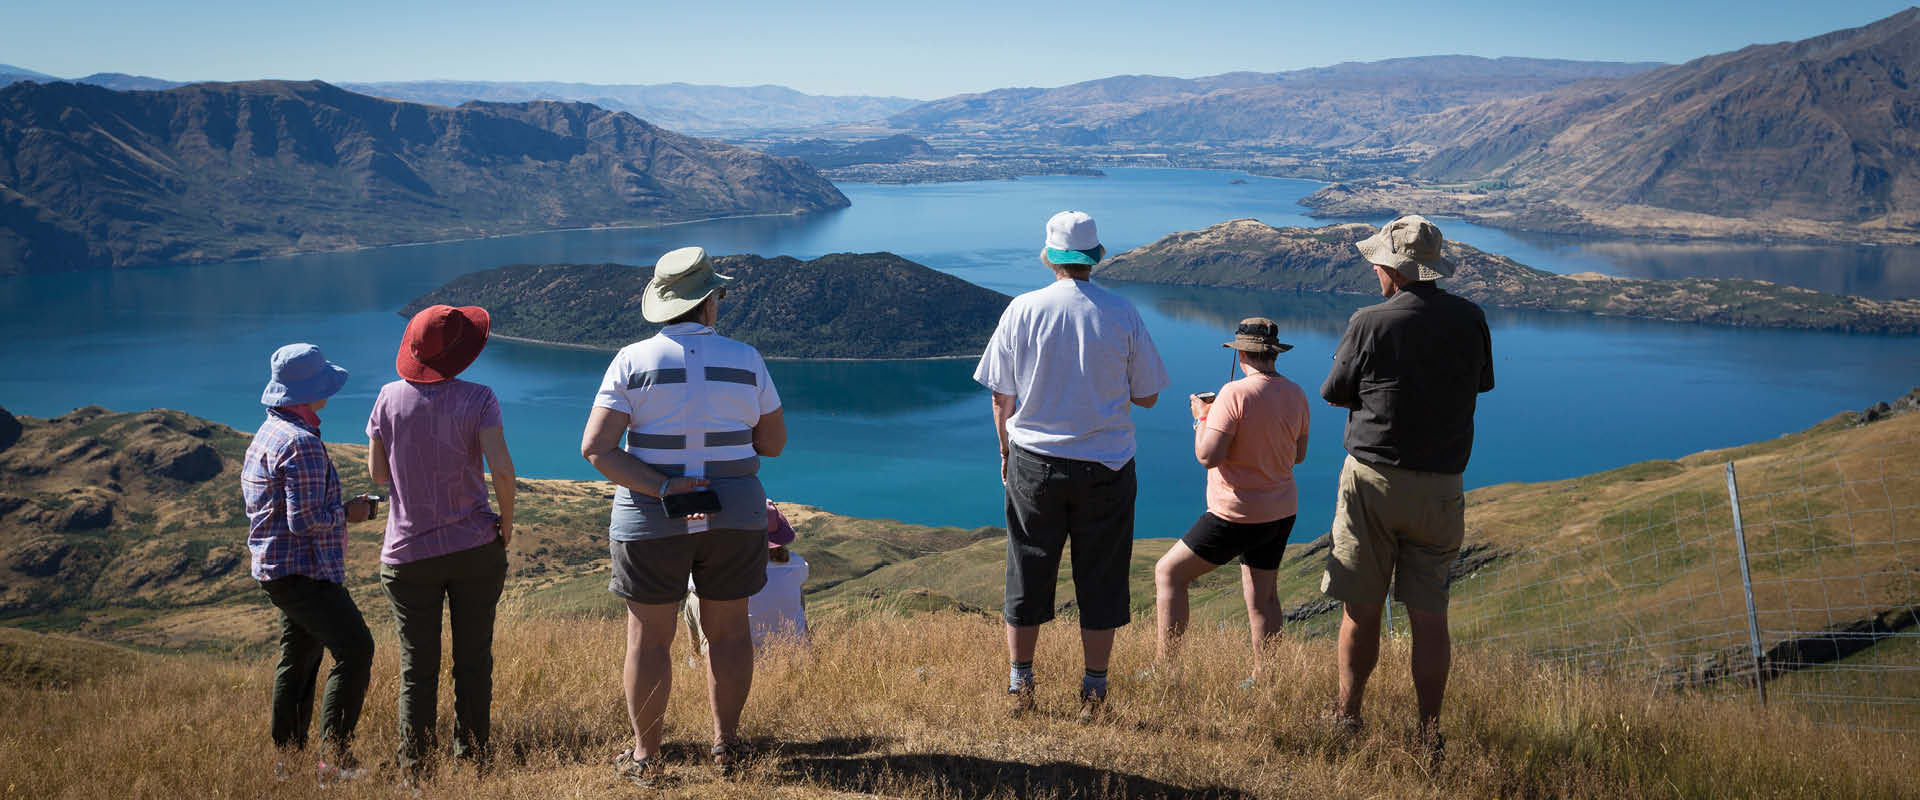 A group of travellers enjoying the view of Wanaka